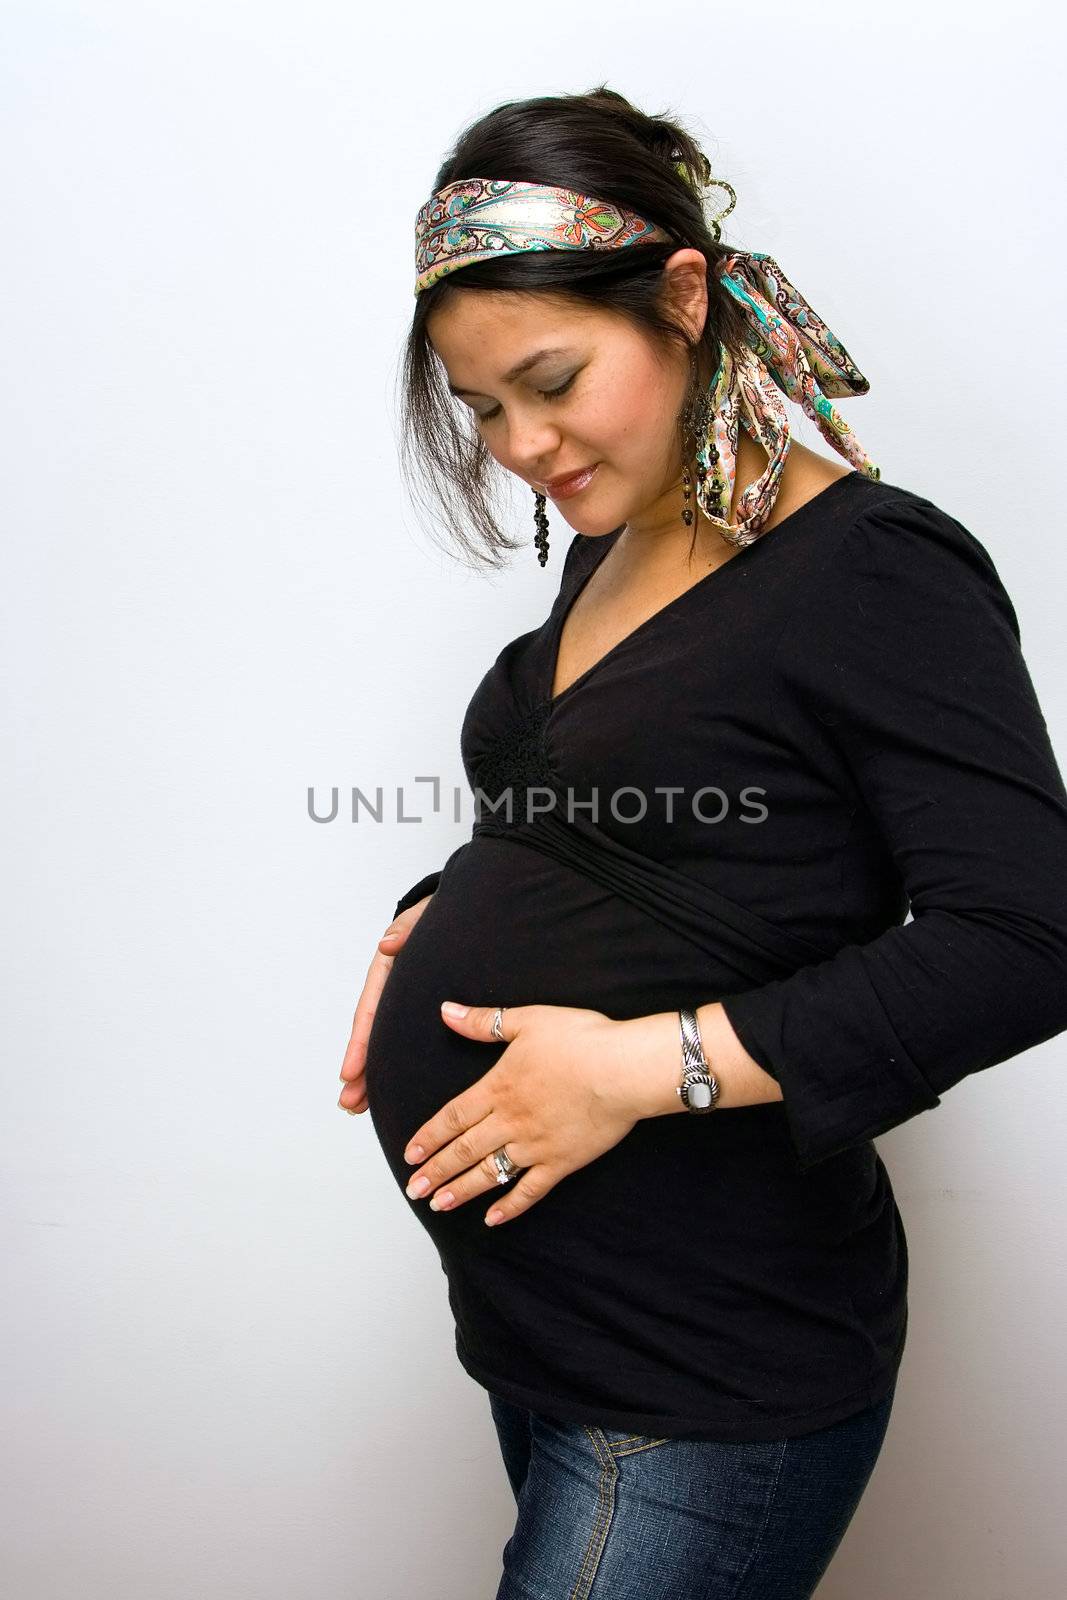 A pregnant woman is touching her belly to feel her baby's movement.